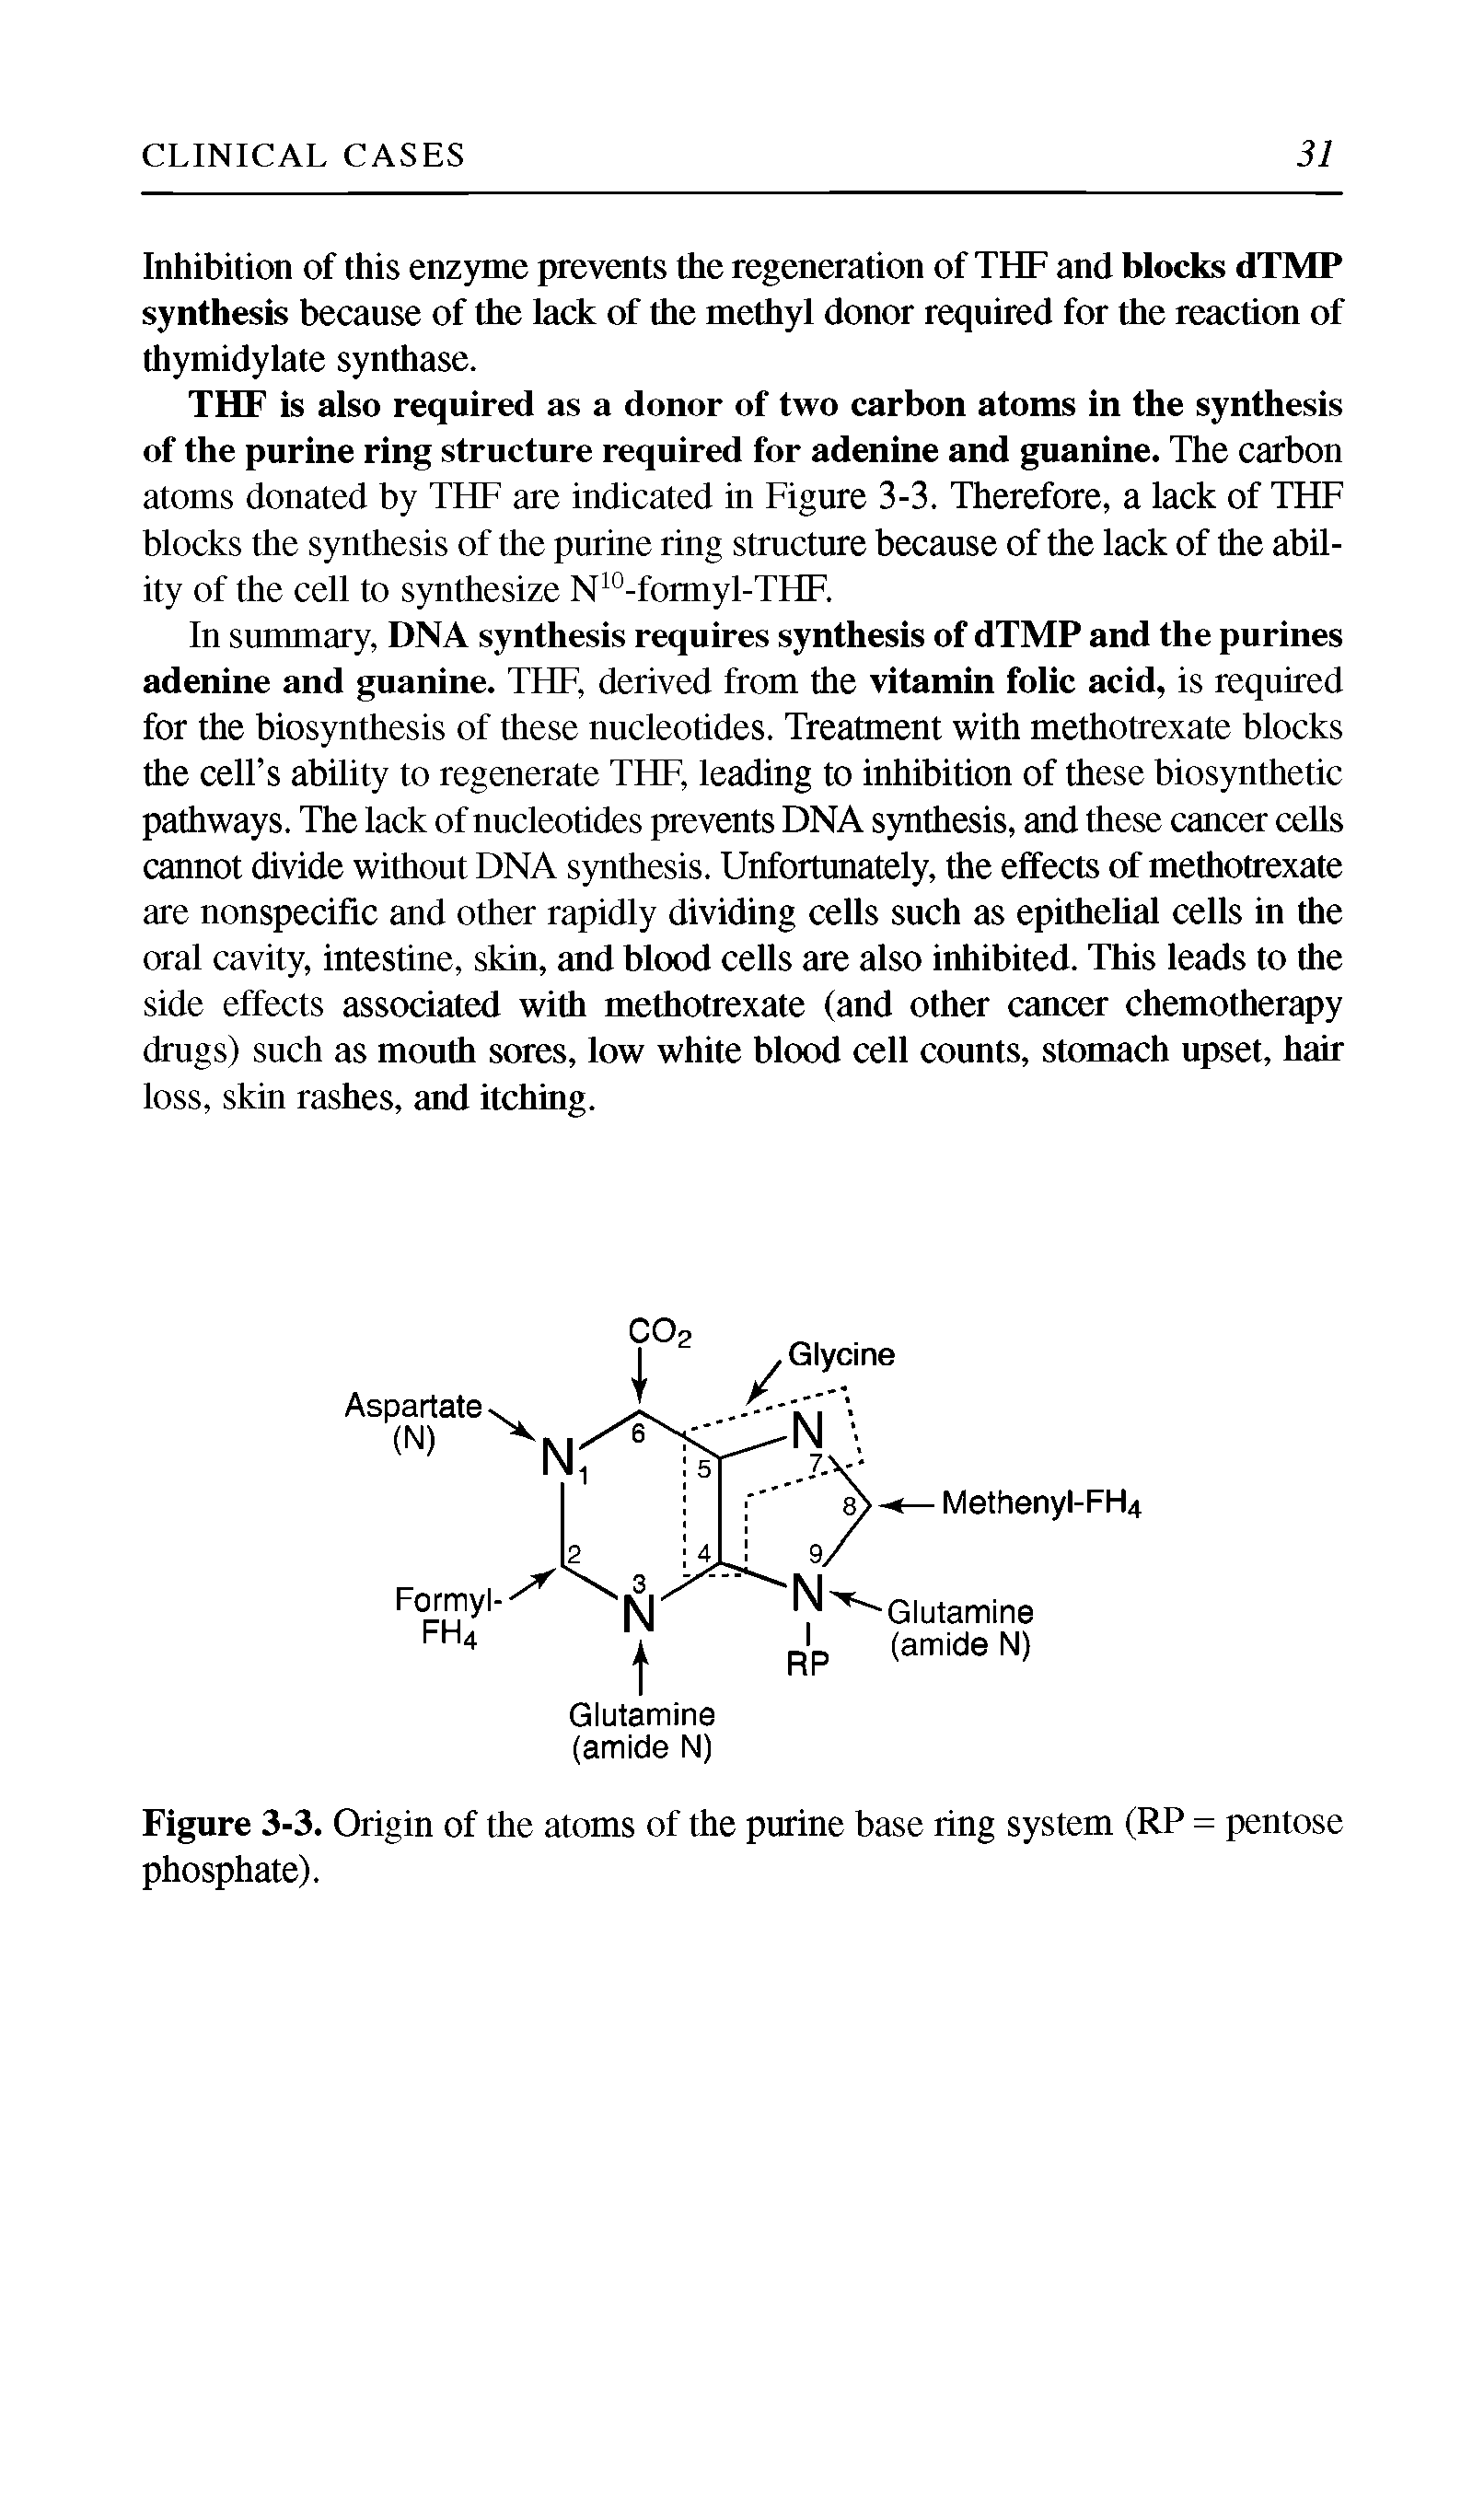 Figure 3-3. Origin of the atoms of the purine base ring system (RP = pentose phosphate).